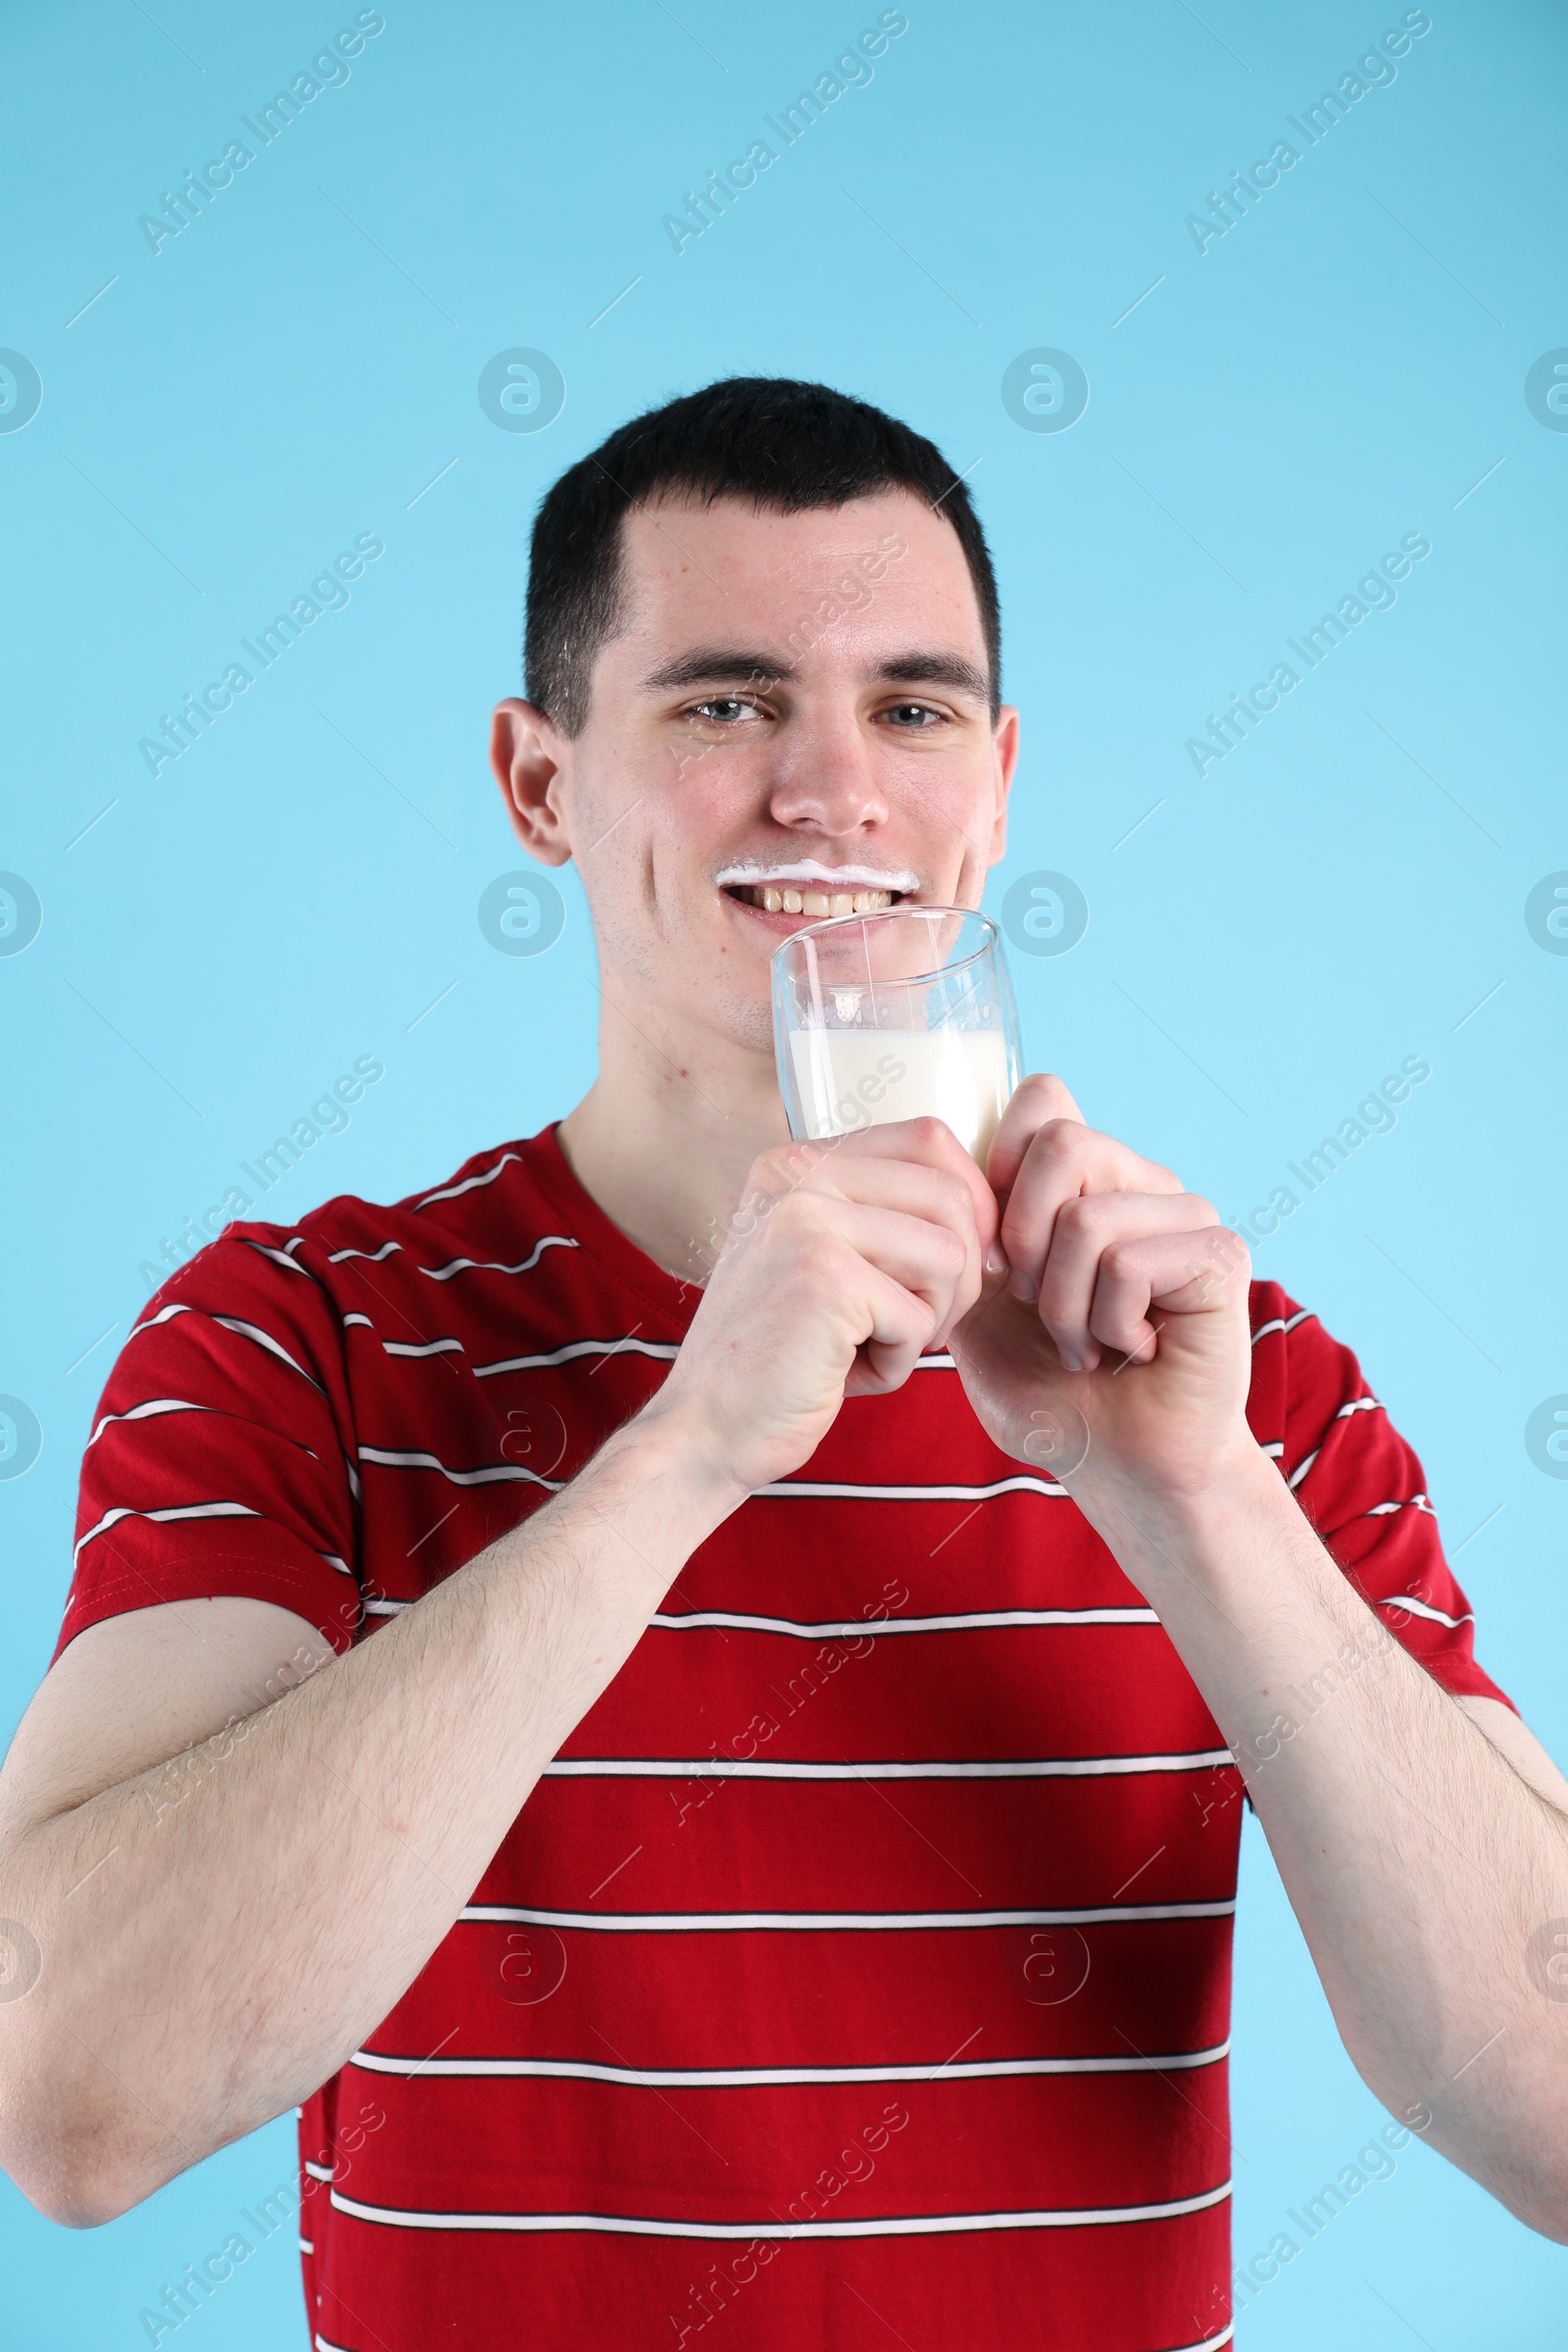 Photo of Milk mustache left after dairy product. Man drinking milk on light blue background